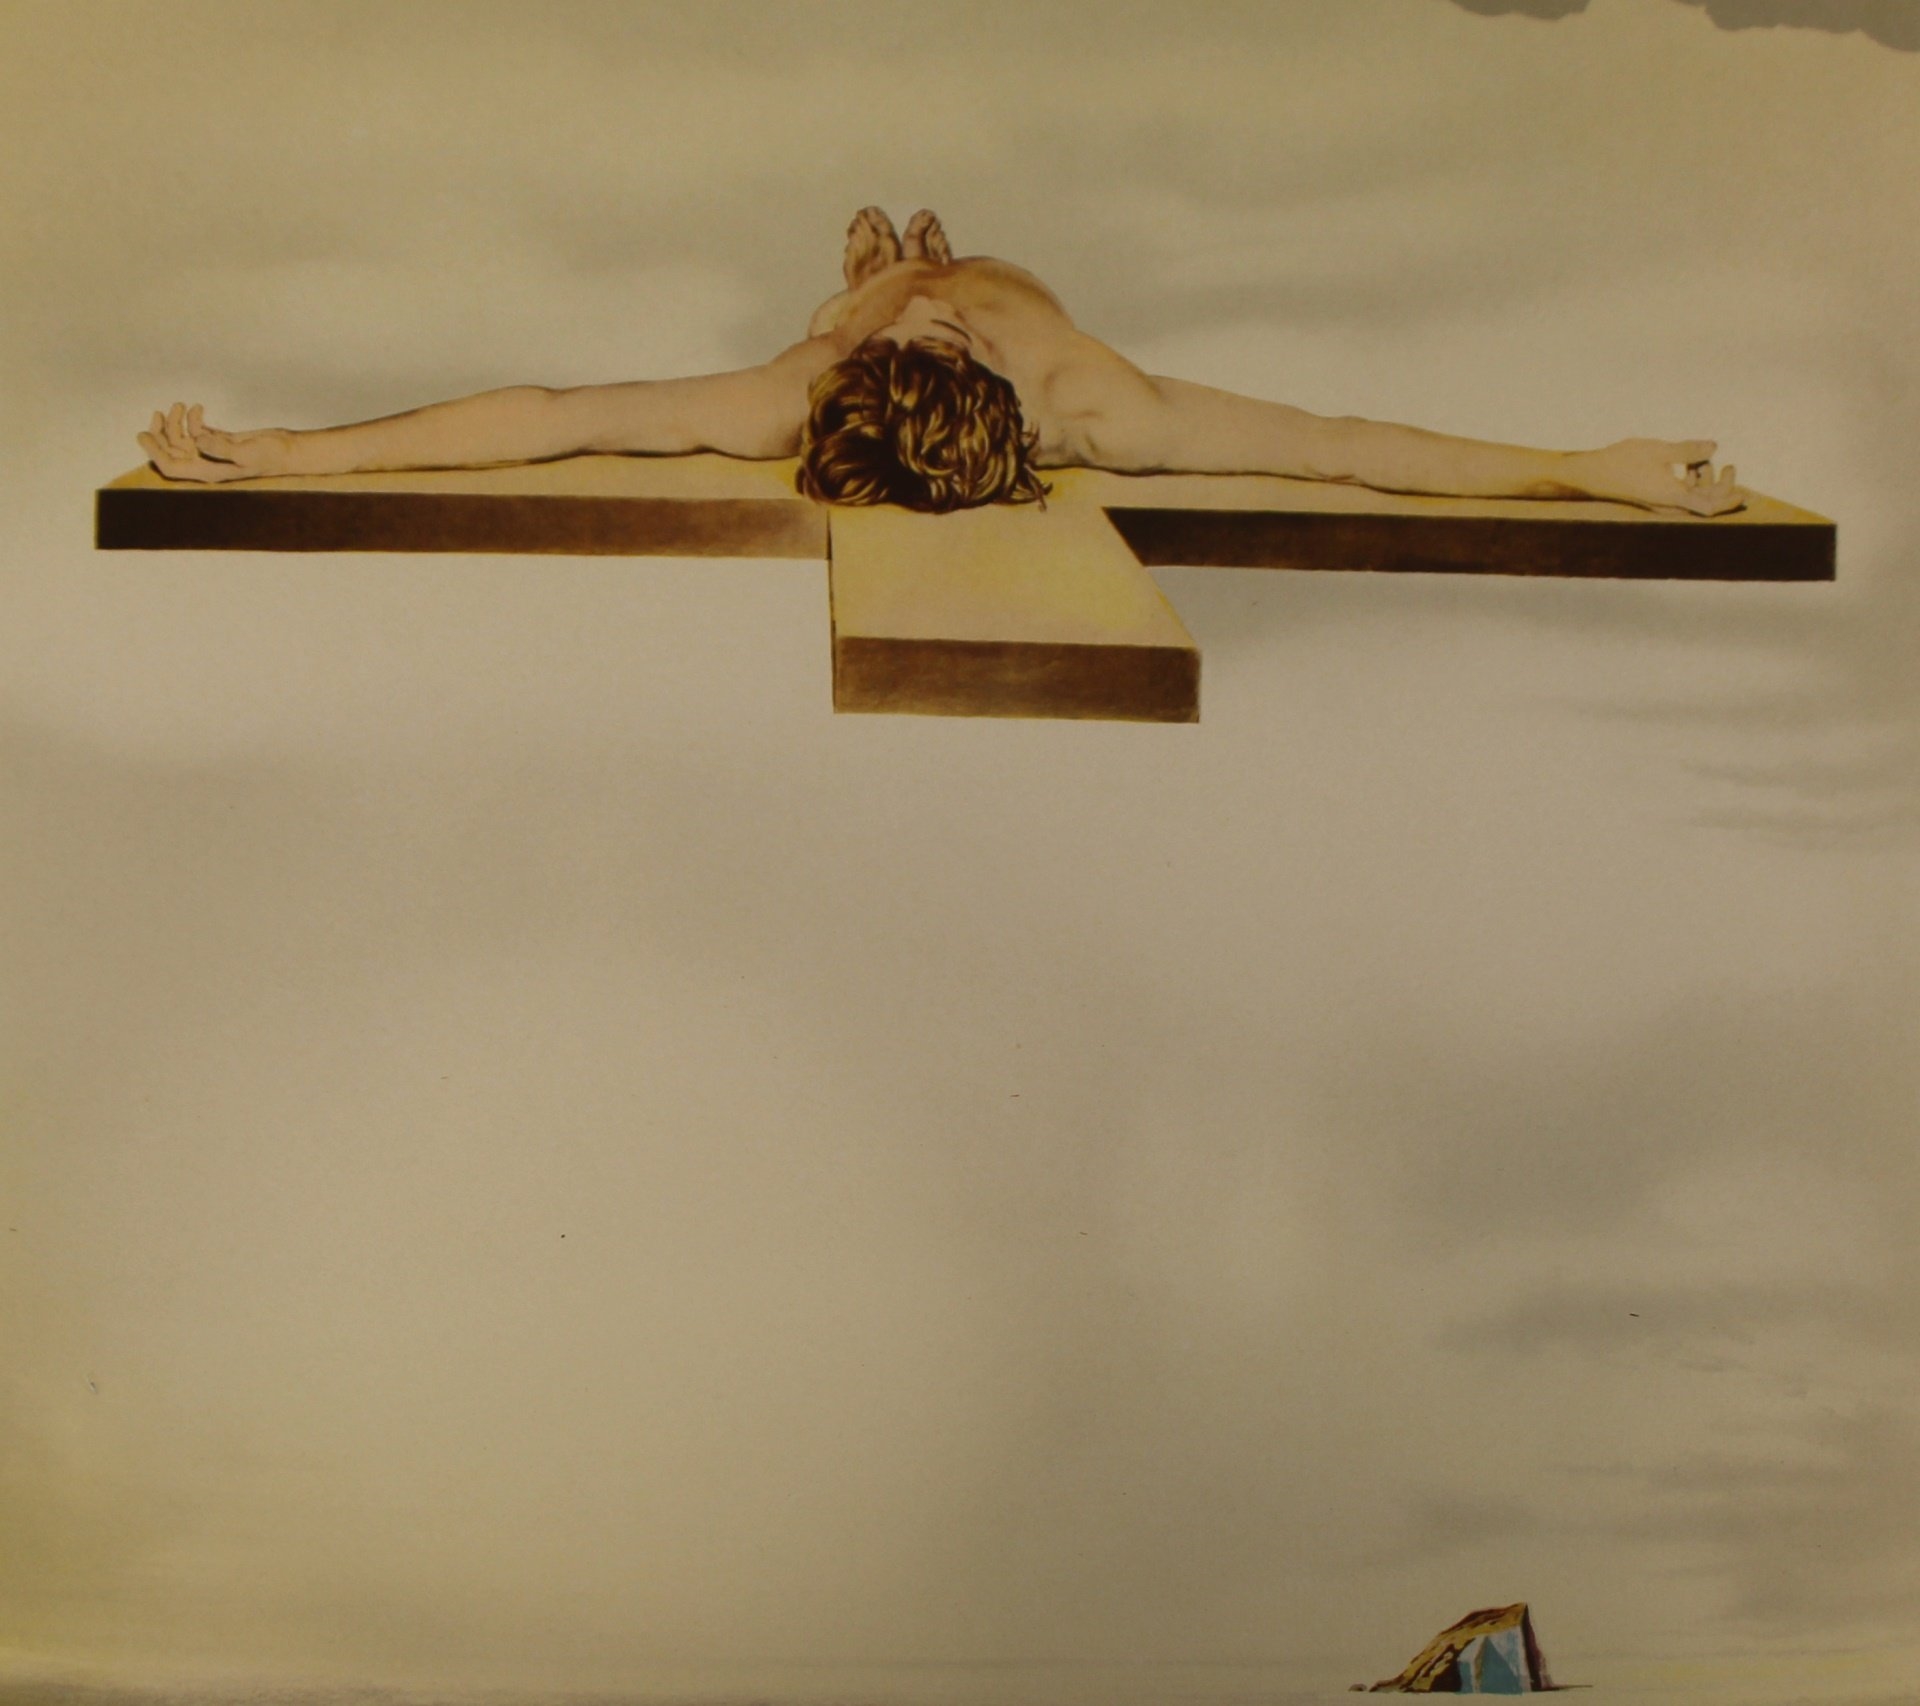 Artwork by Salvador Dalí, Crucifixion (Christ of Gala), Made of Lithograph